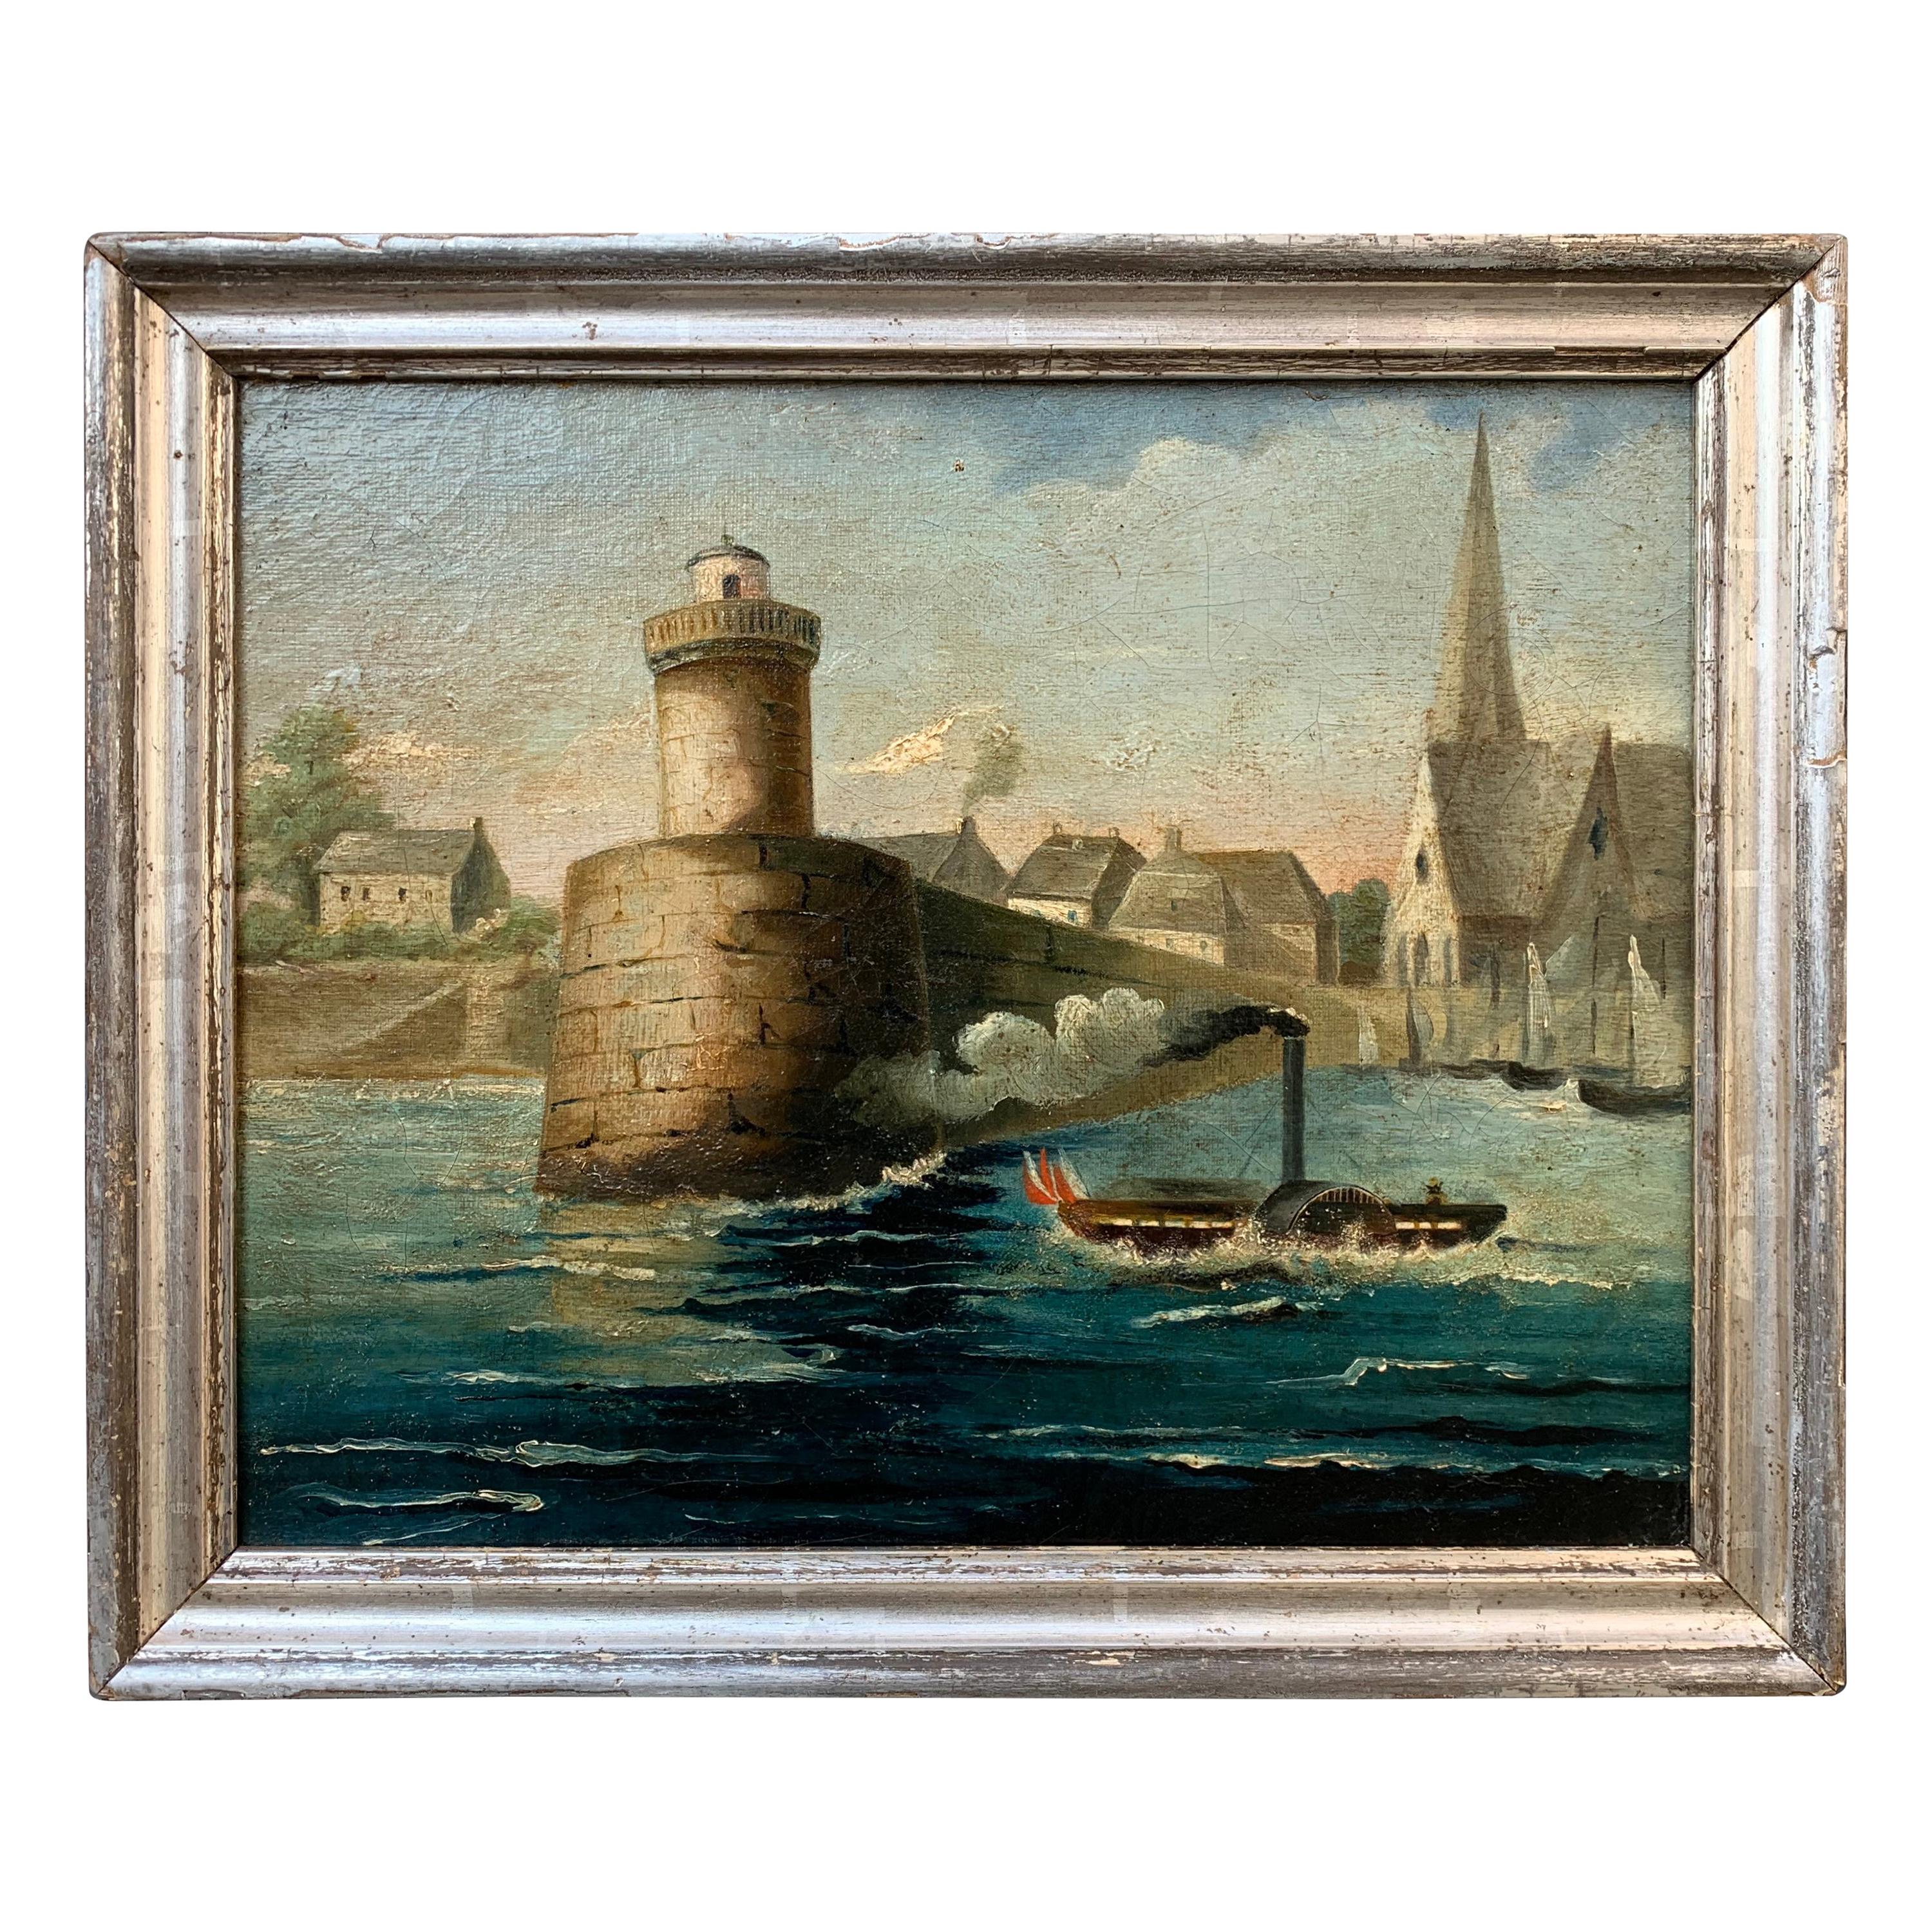 Early 19th Century French Oil Painting of Steamboat in a River Harbor Scene